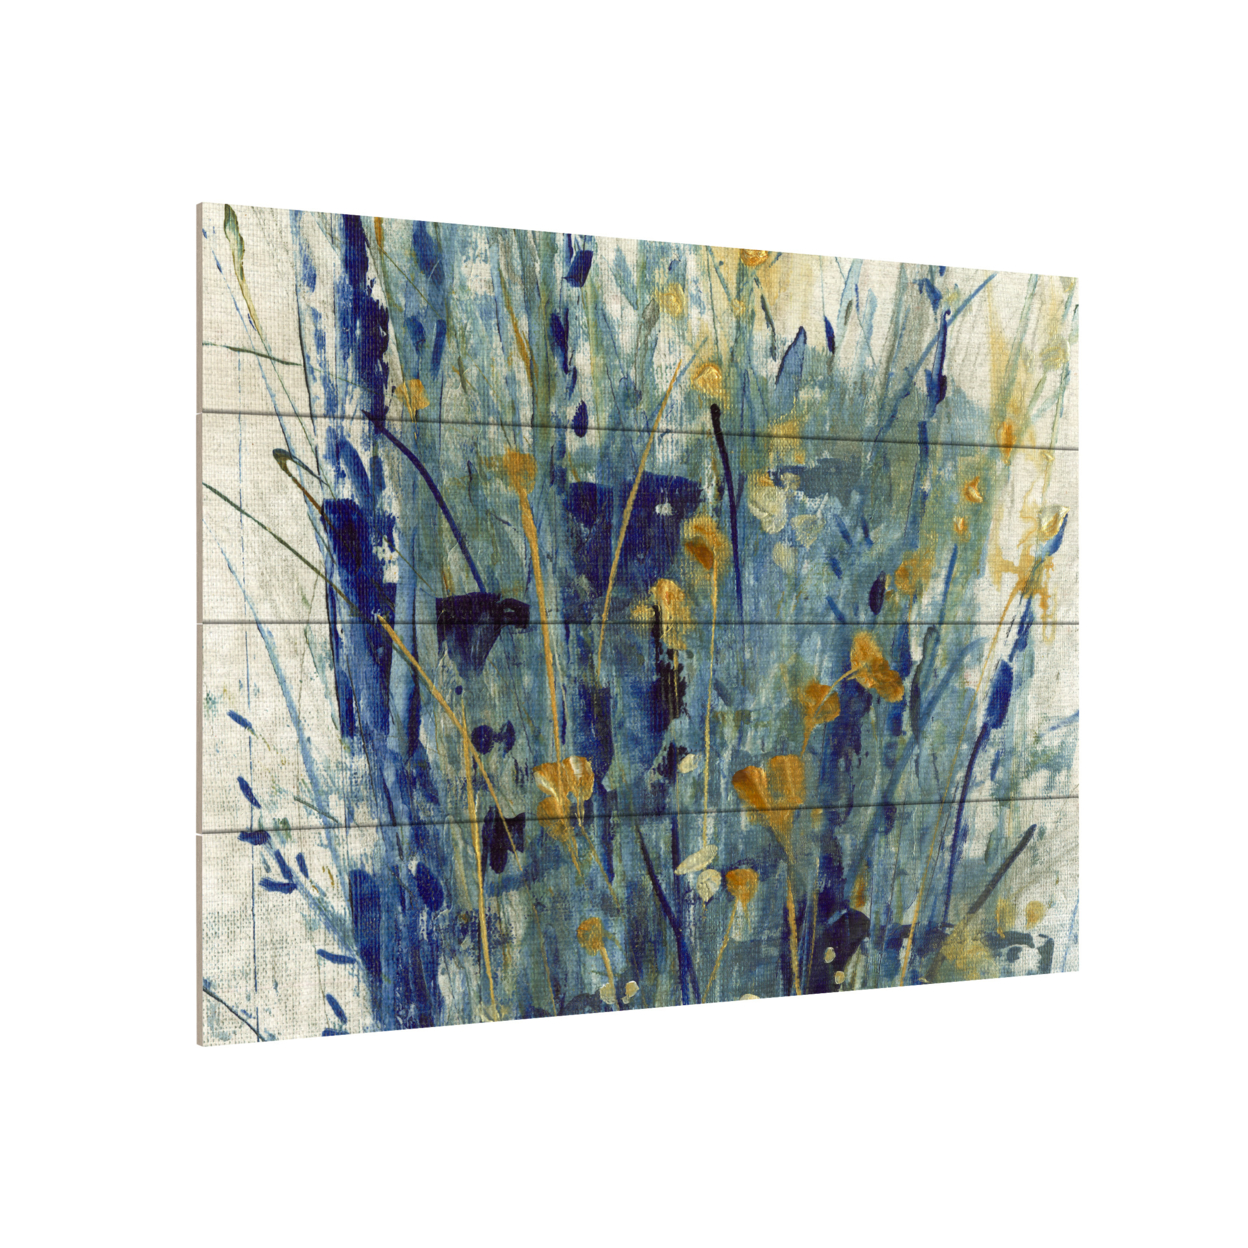 Wall Art 12 X 16 Inches Titled Indigo Floral Ii Ready To Hang Printed On Wooden Planks